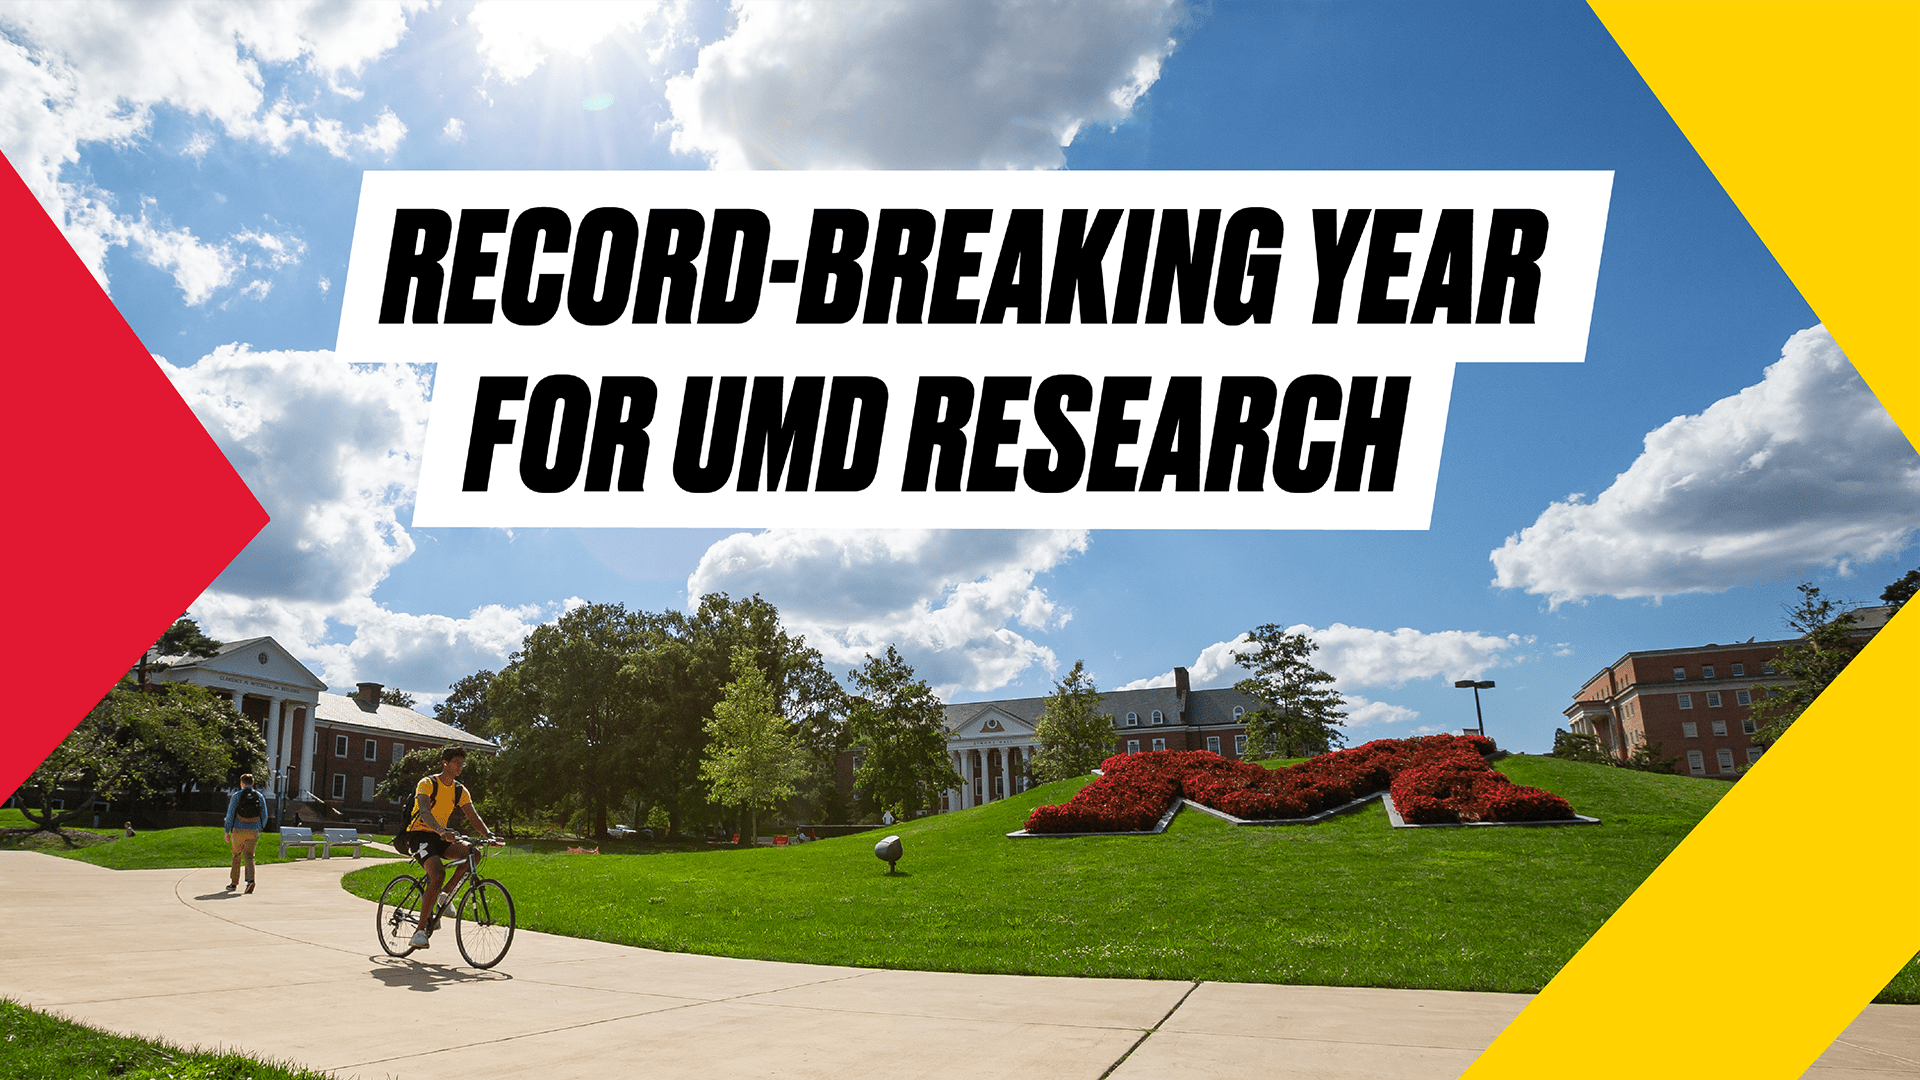 Record-Breaking Year for UMD Research